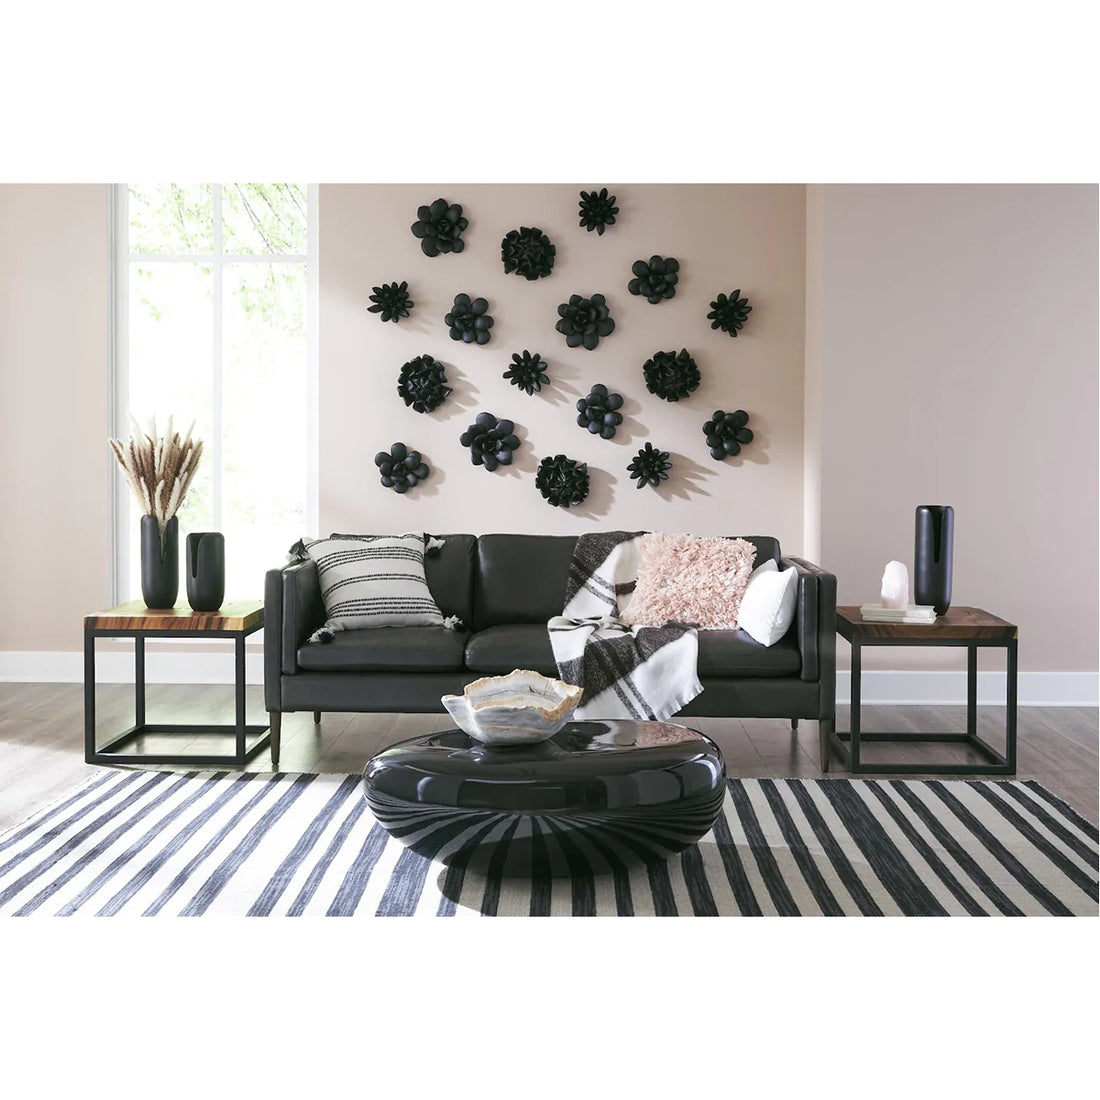 Phillips Collection Oviferum Smooth Black Succulent Wall Art